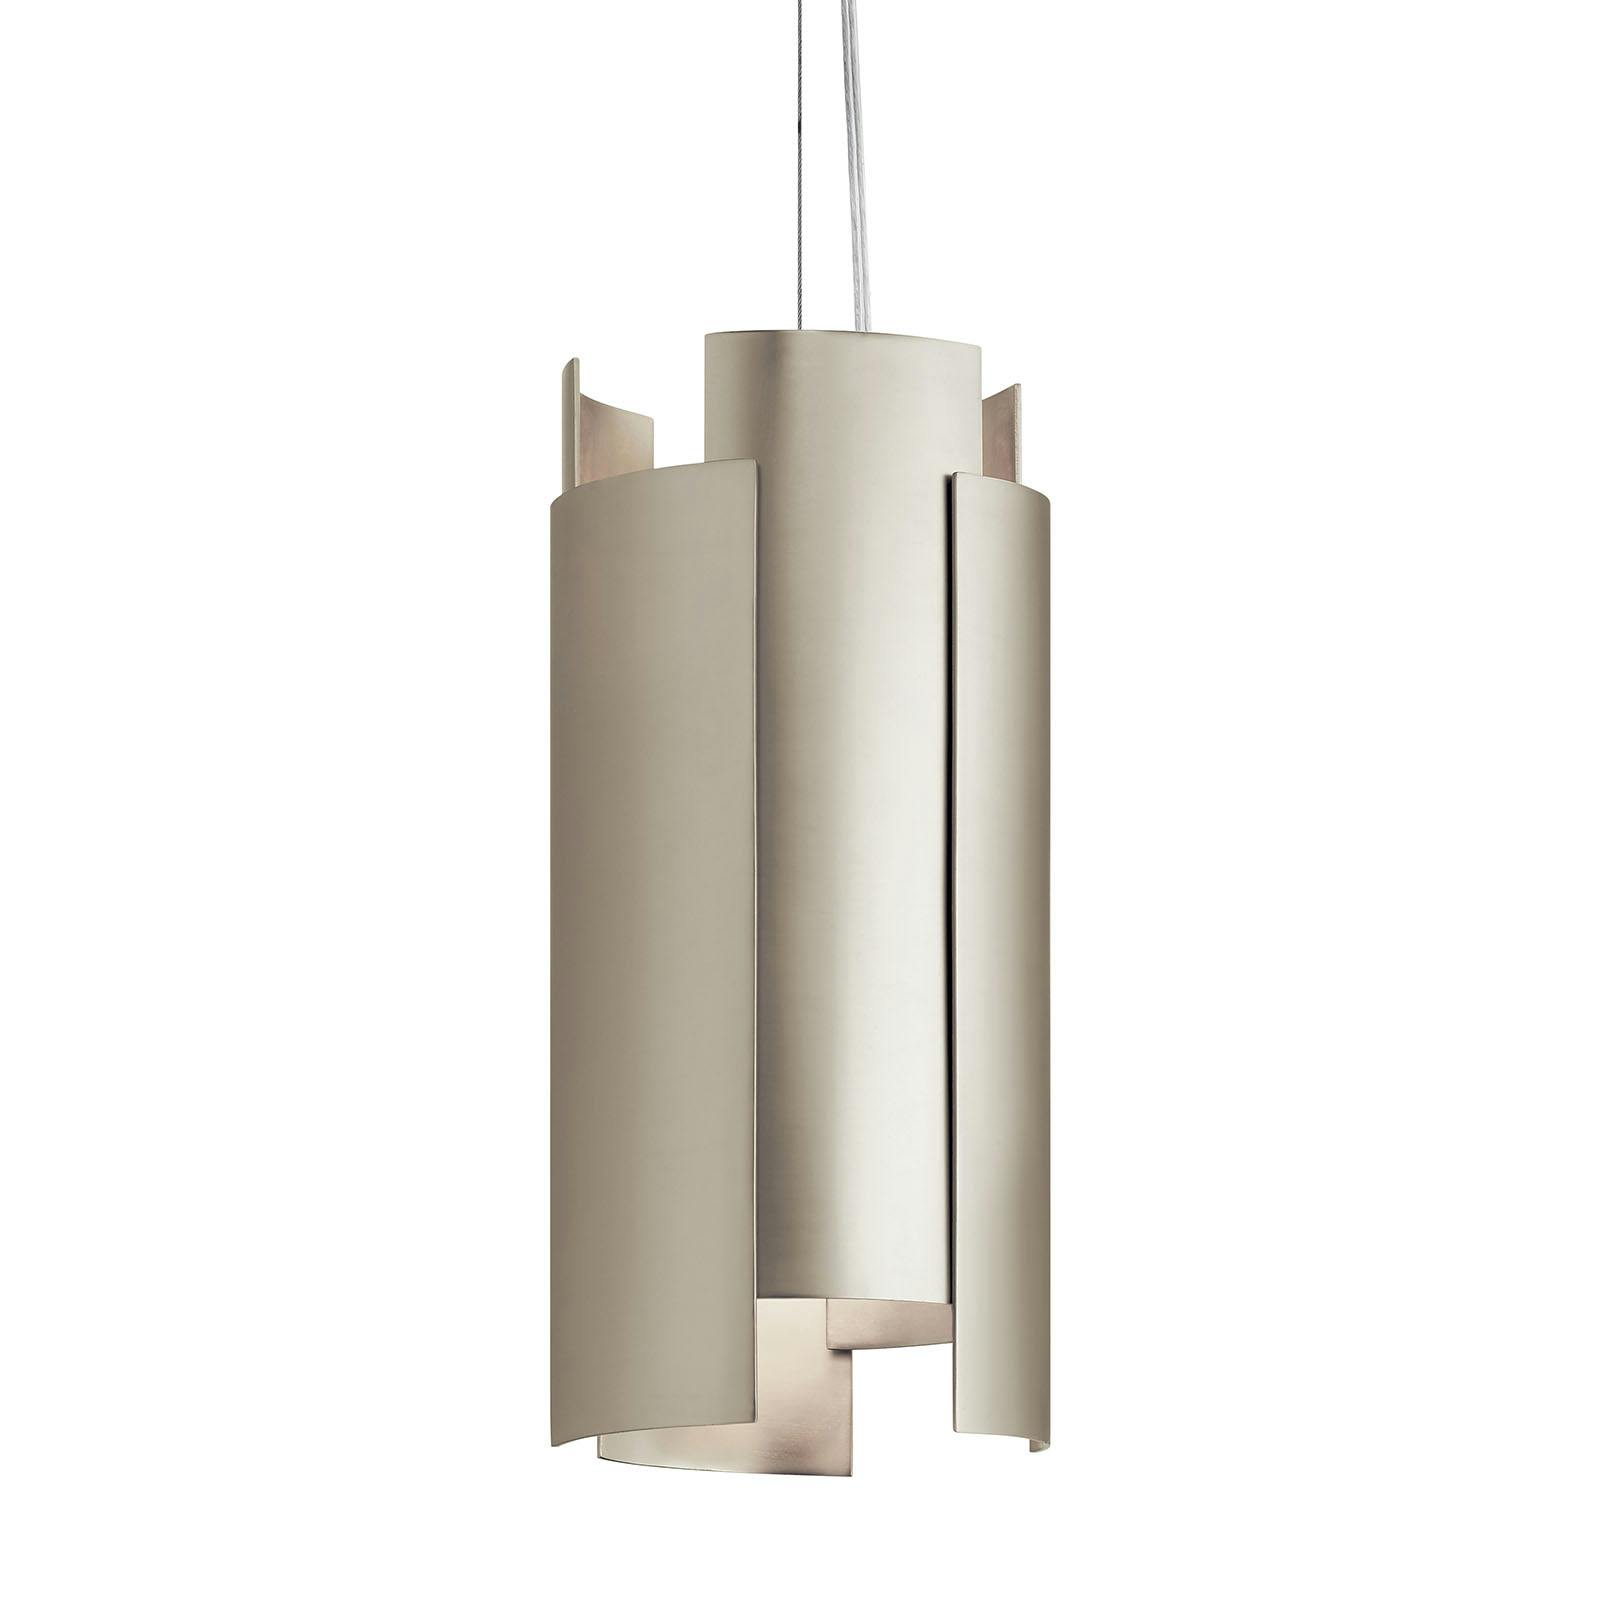 Close up view of the Moderne LED Mini Pendant Satin Nickel on a white background